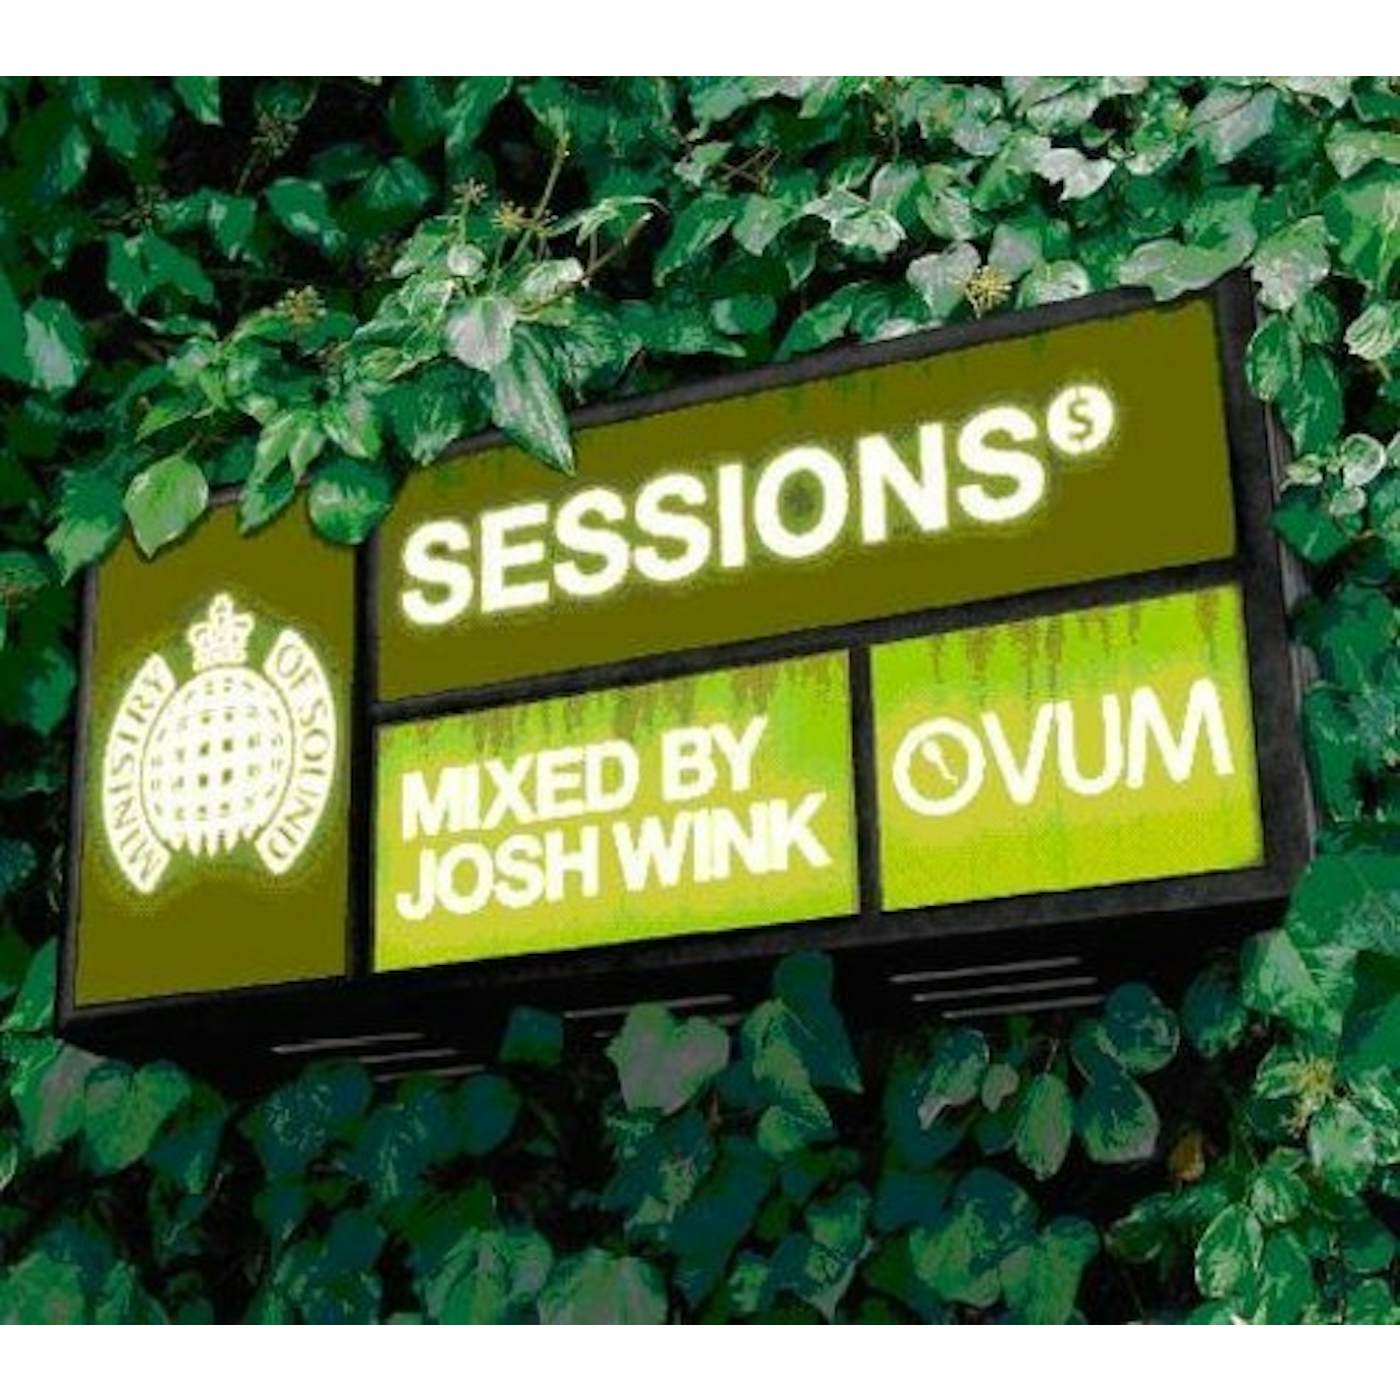 SESSIONS MIXED BY JOSH WINK CD